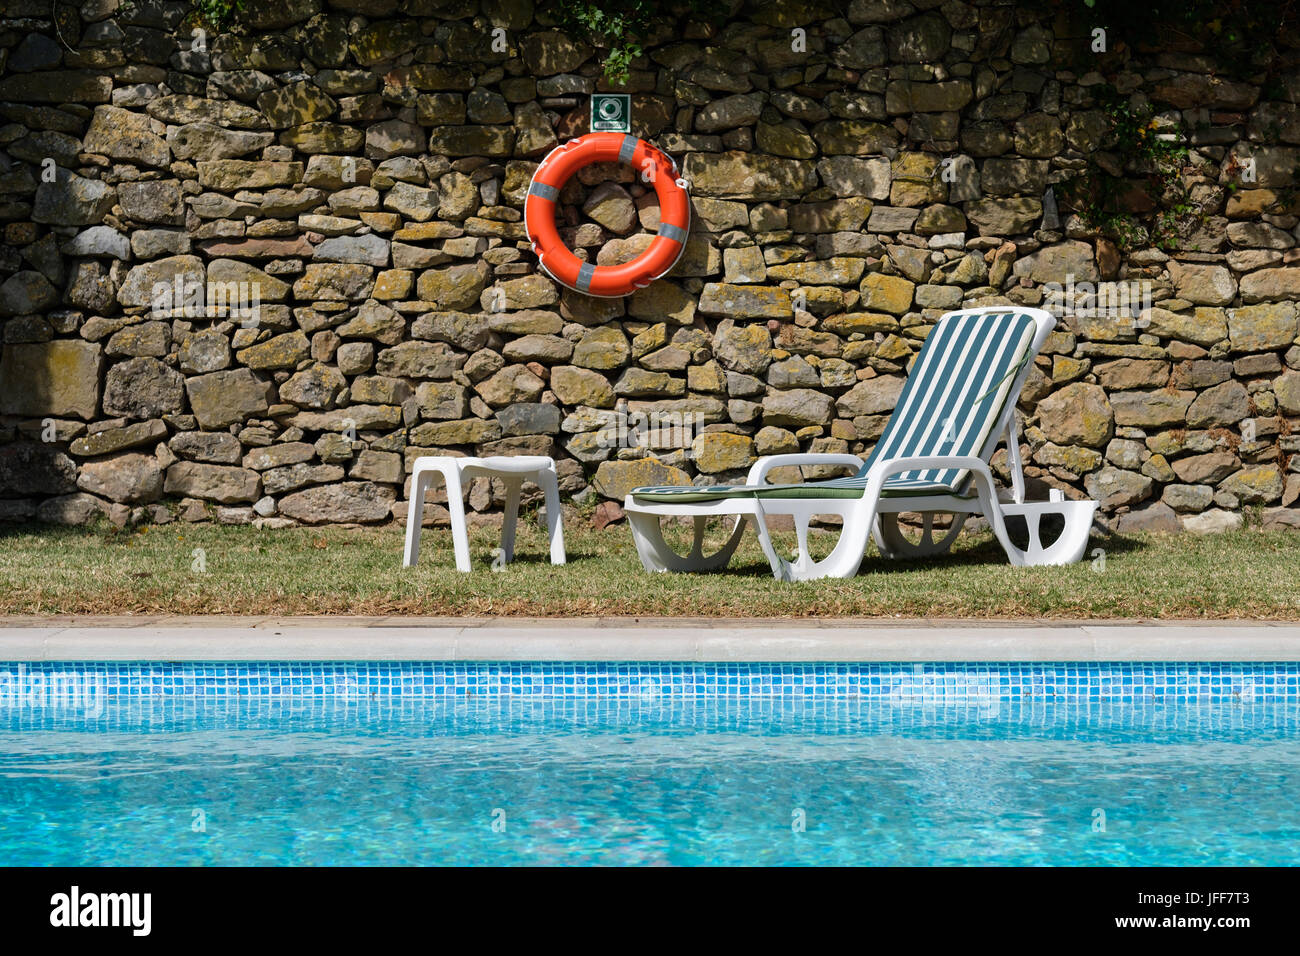 Sun lounger next to an outdoor swimming pool Stock Photo